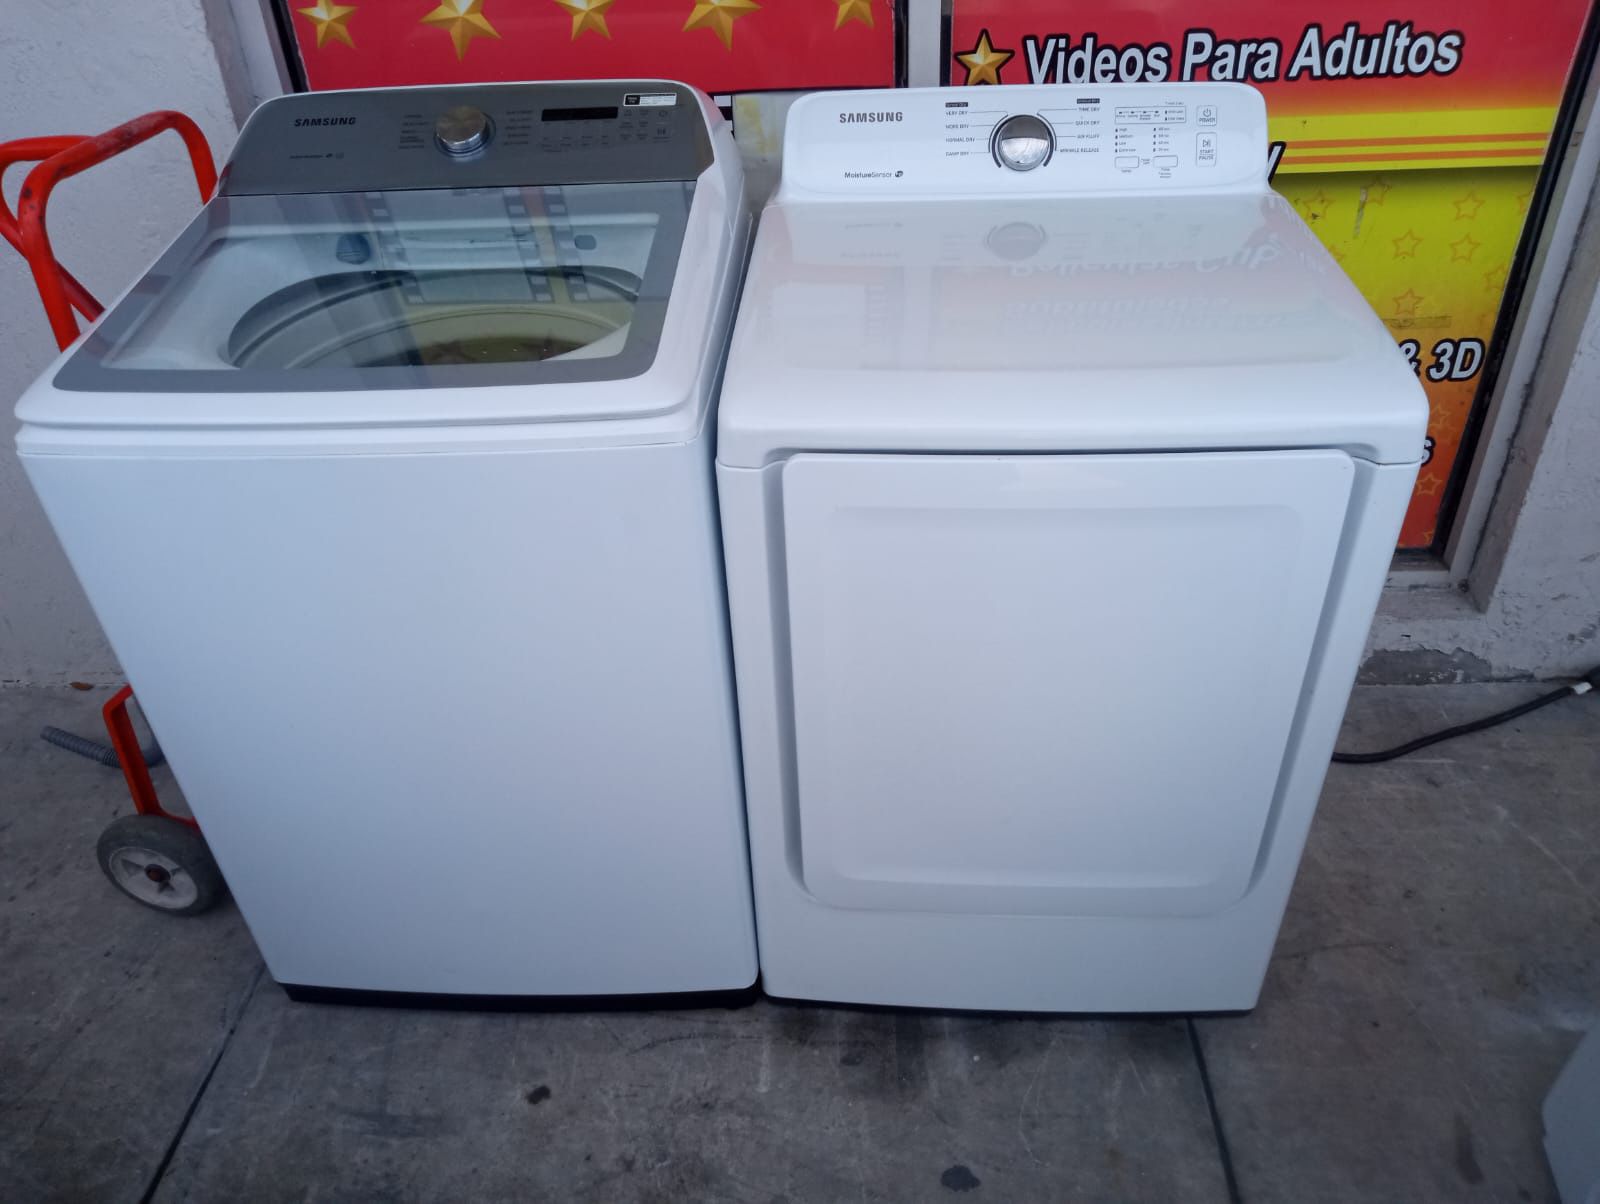 Washer And Dryer Like New With Warranty Perfect Condition 